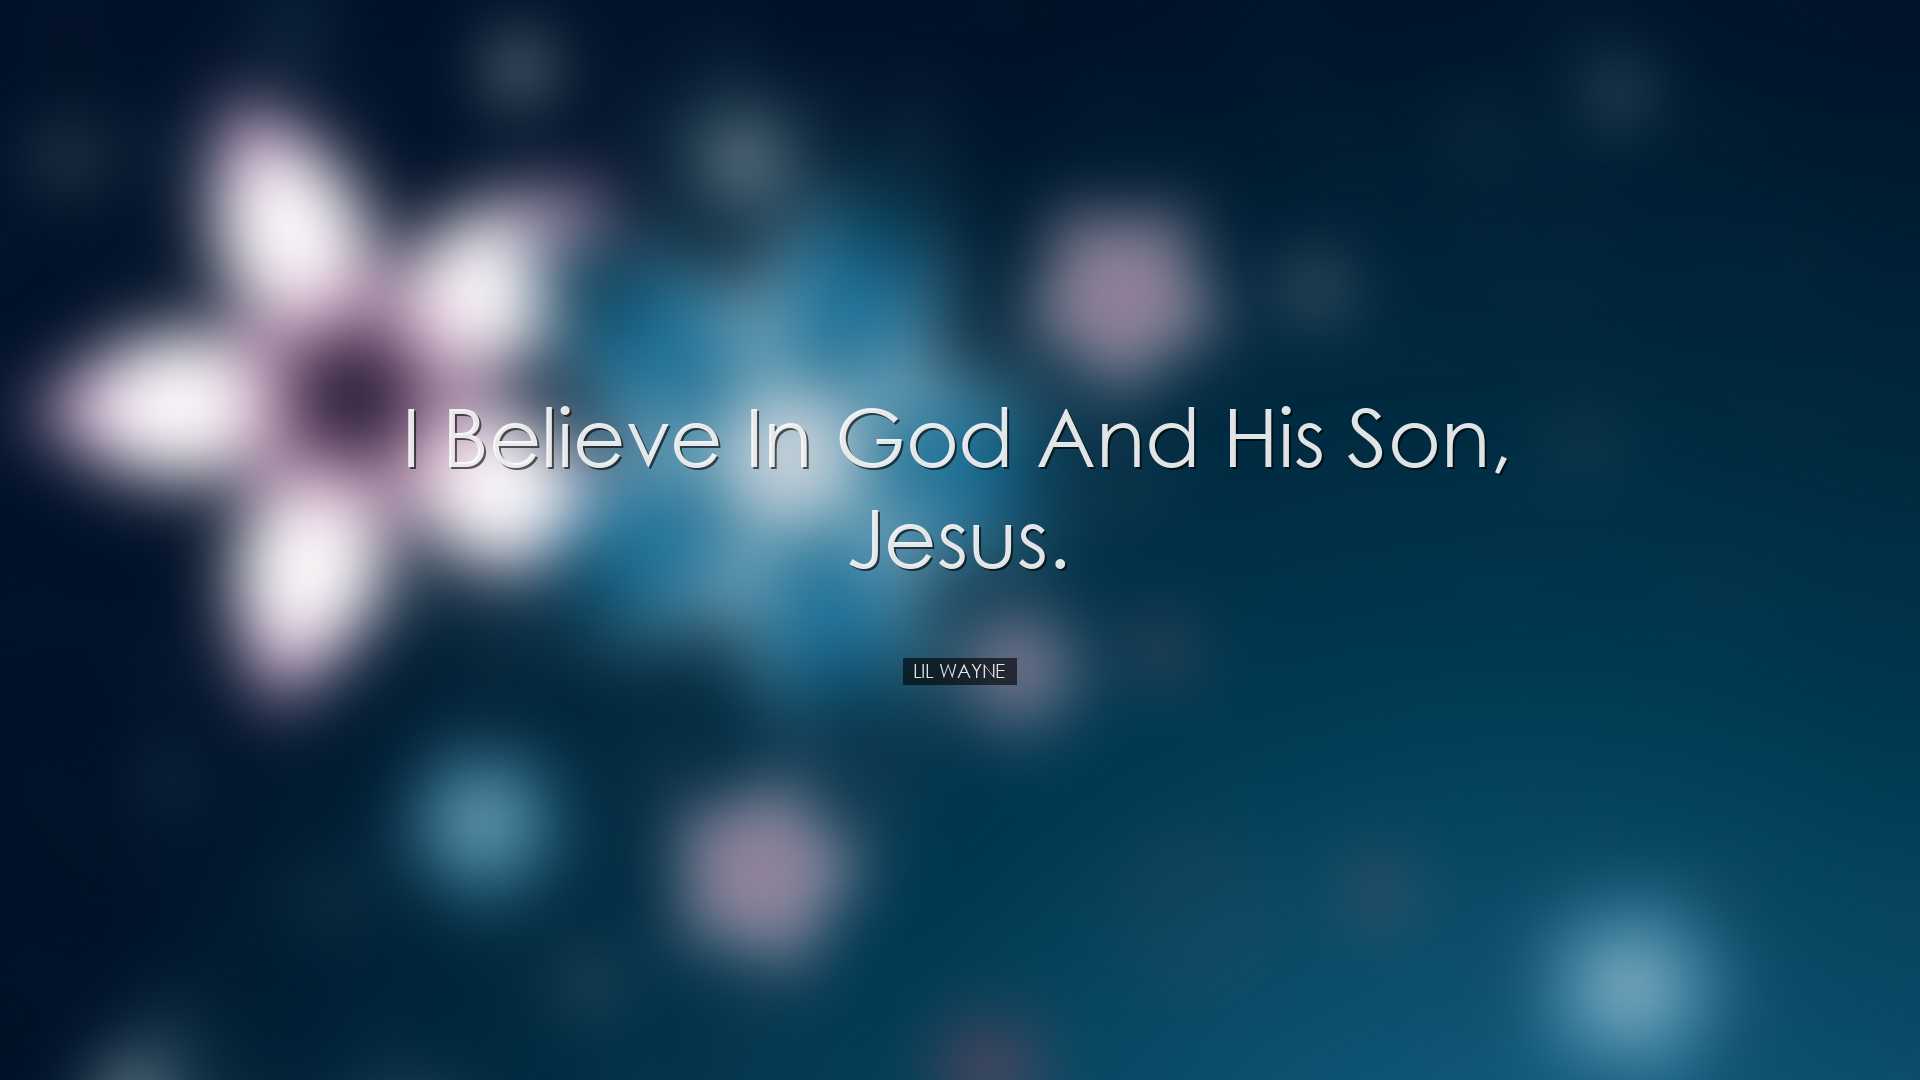 I believe in God and his son, Jesus. - Lil Wayne